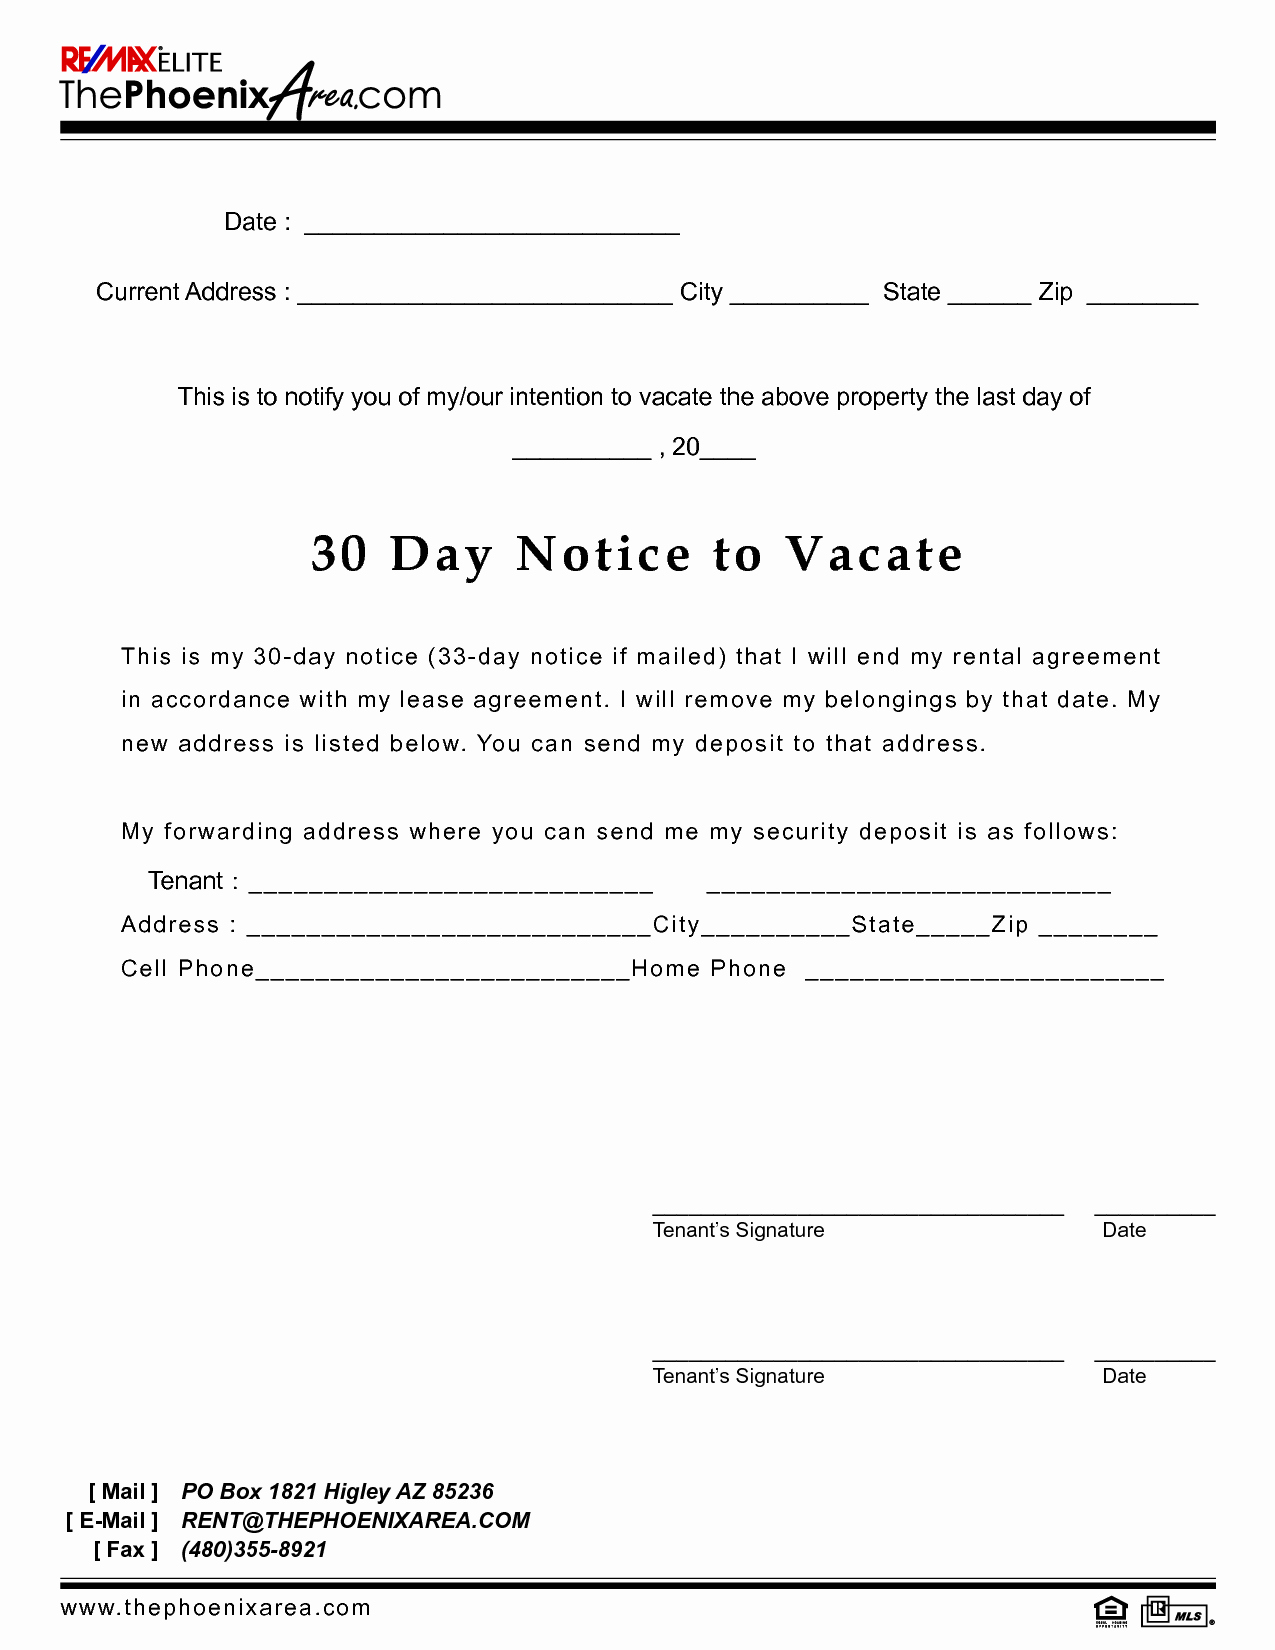 30 Days Eviction Notice Template New Best S Of 30 Day Eviction Letter Template 30 Day